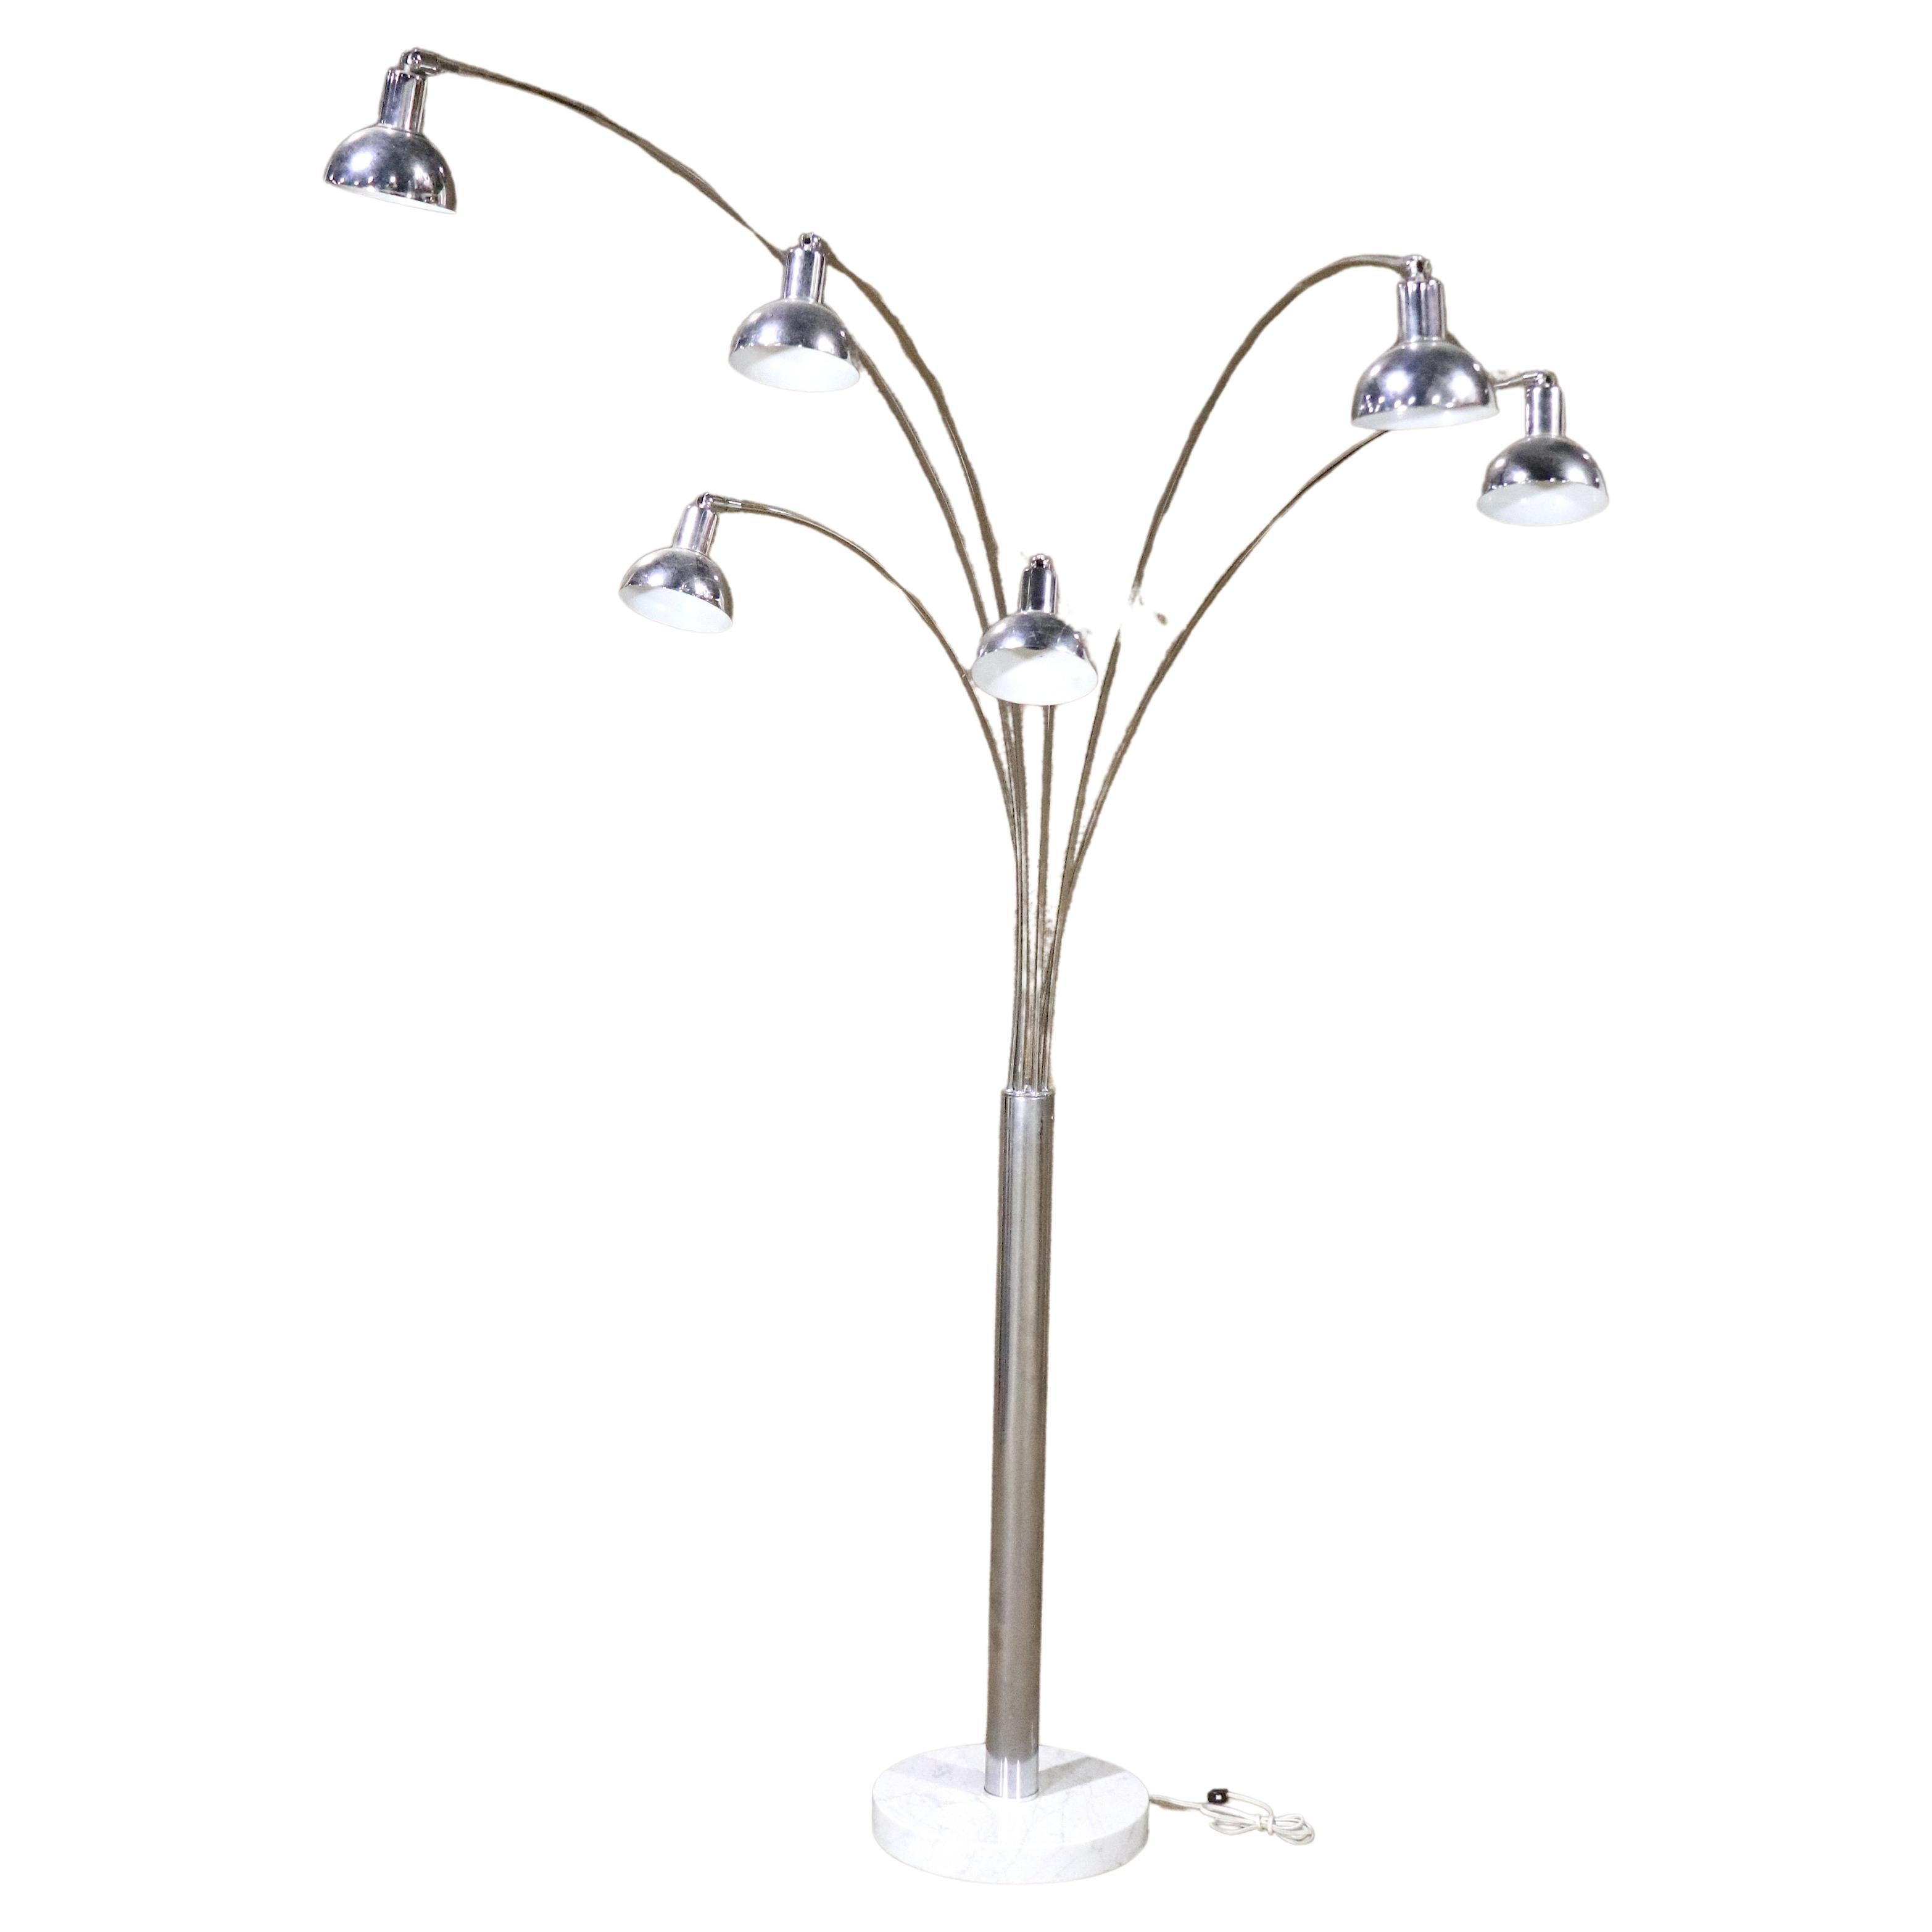 Mutual Sunset Lighting Company Arch Lamp For Sale